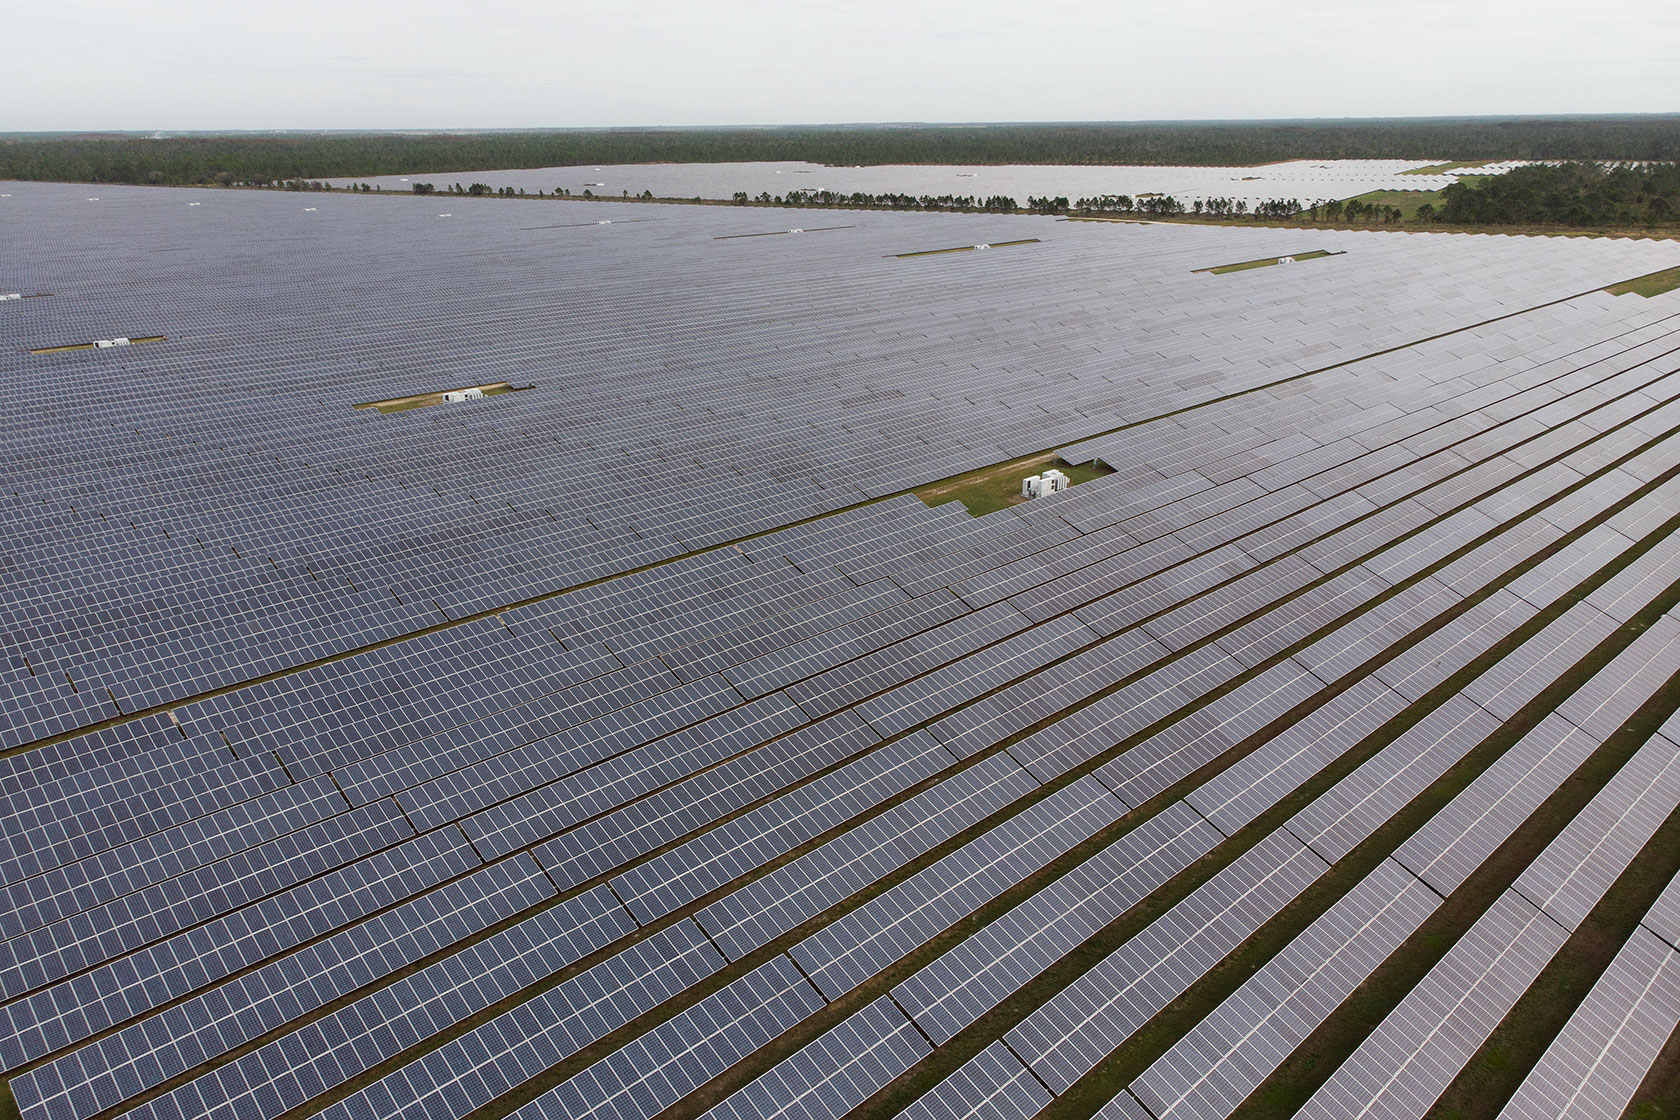 Photo shows rows of solar panels in a flat area with a body of water in the background